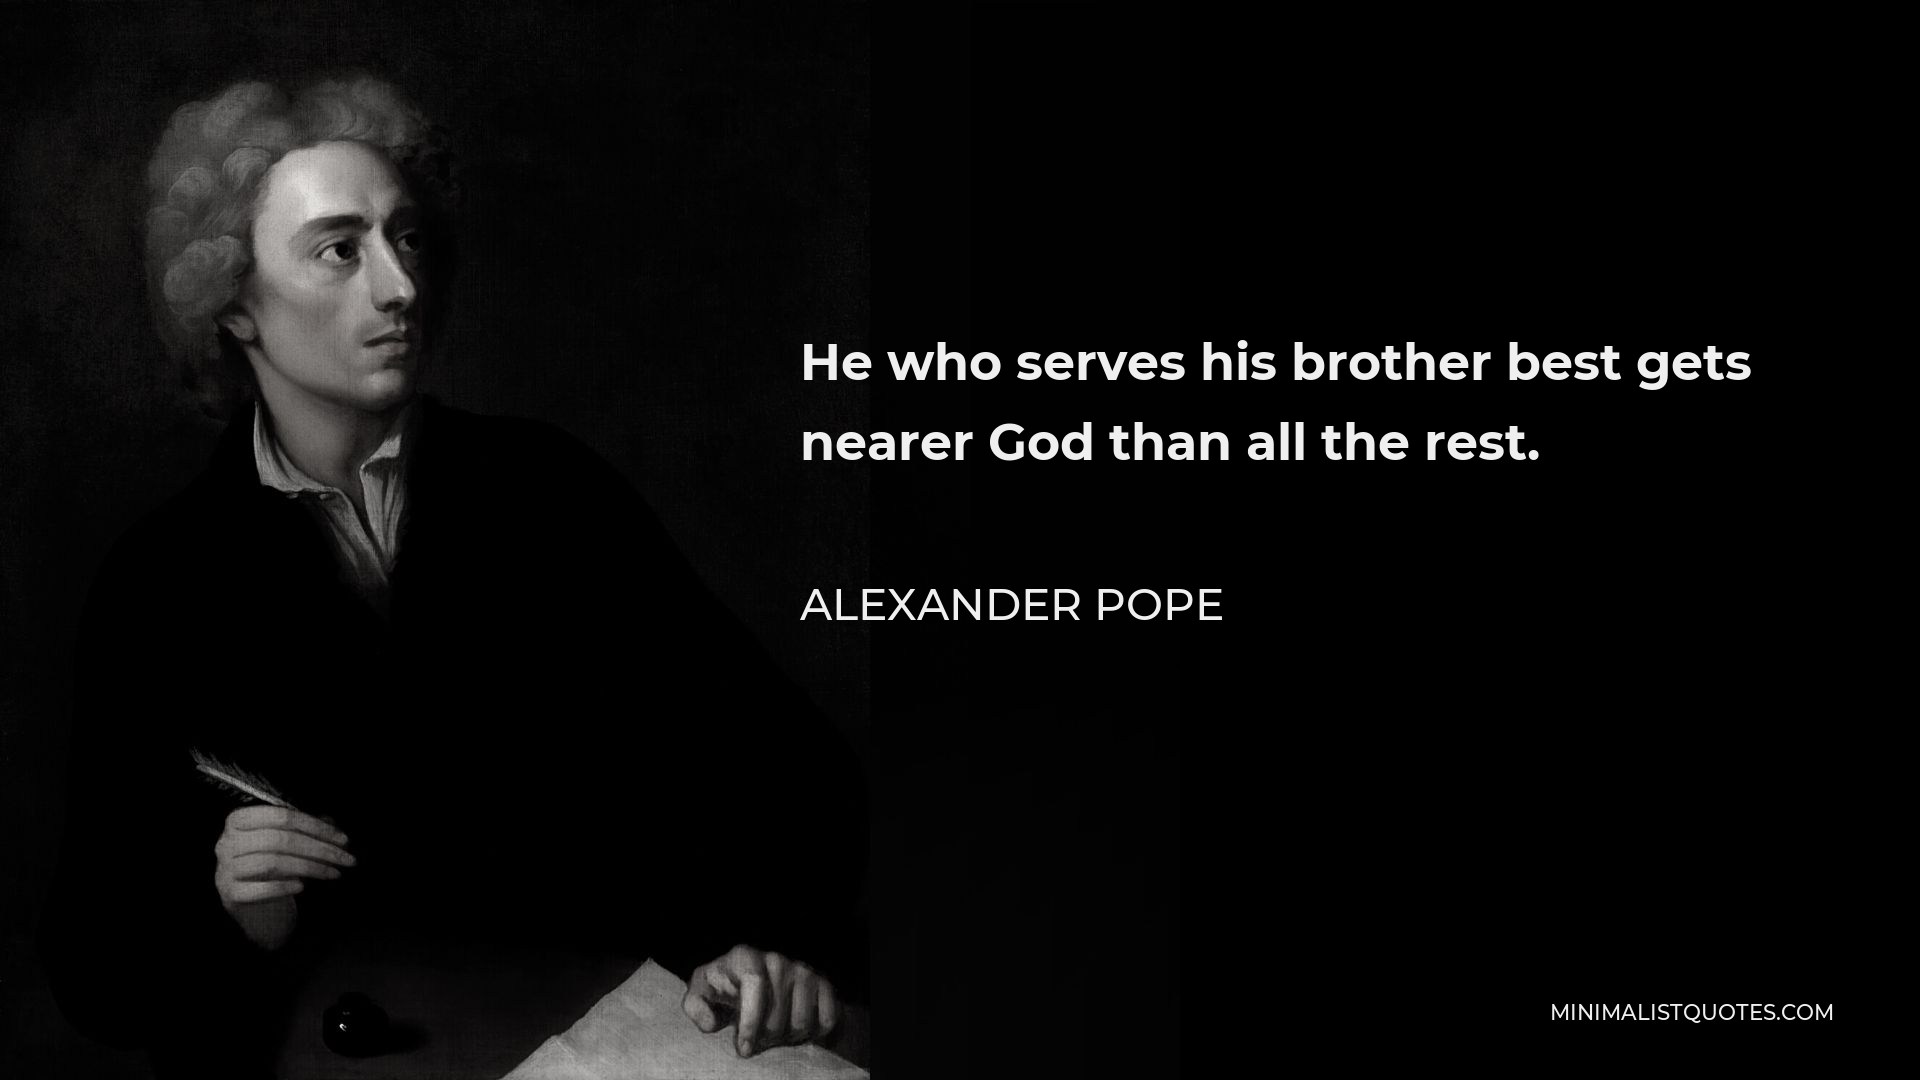 Alexander Pope Quote - He who serves his brother best gets nearer God than all the rest.